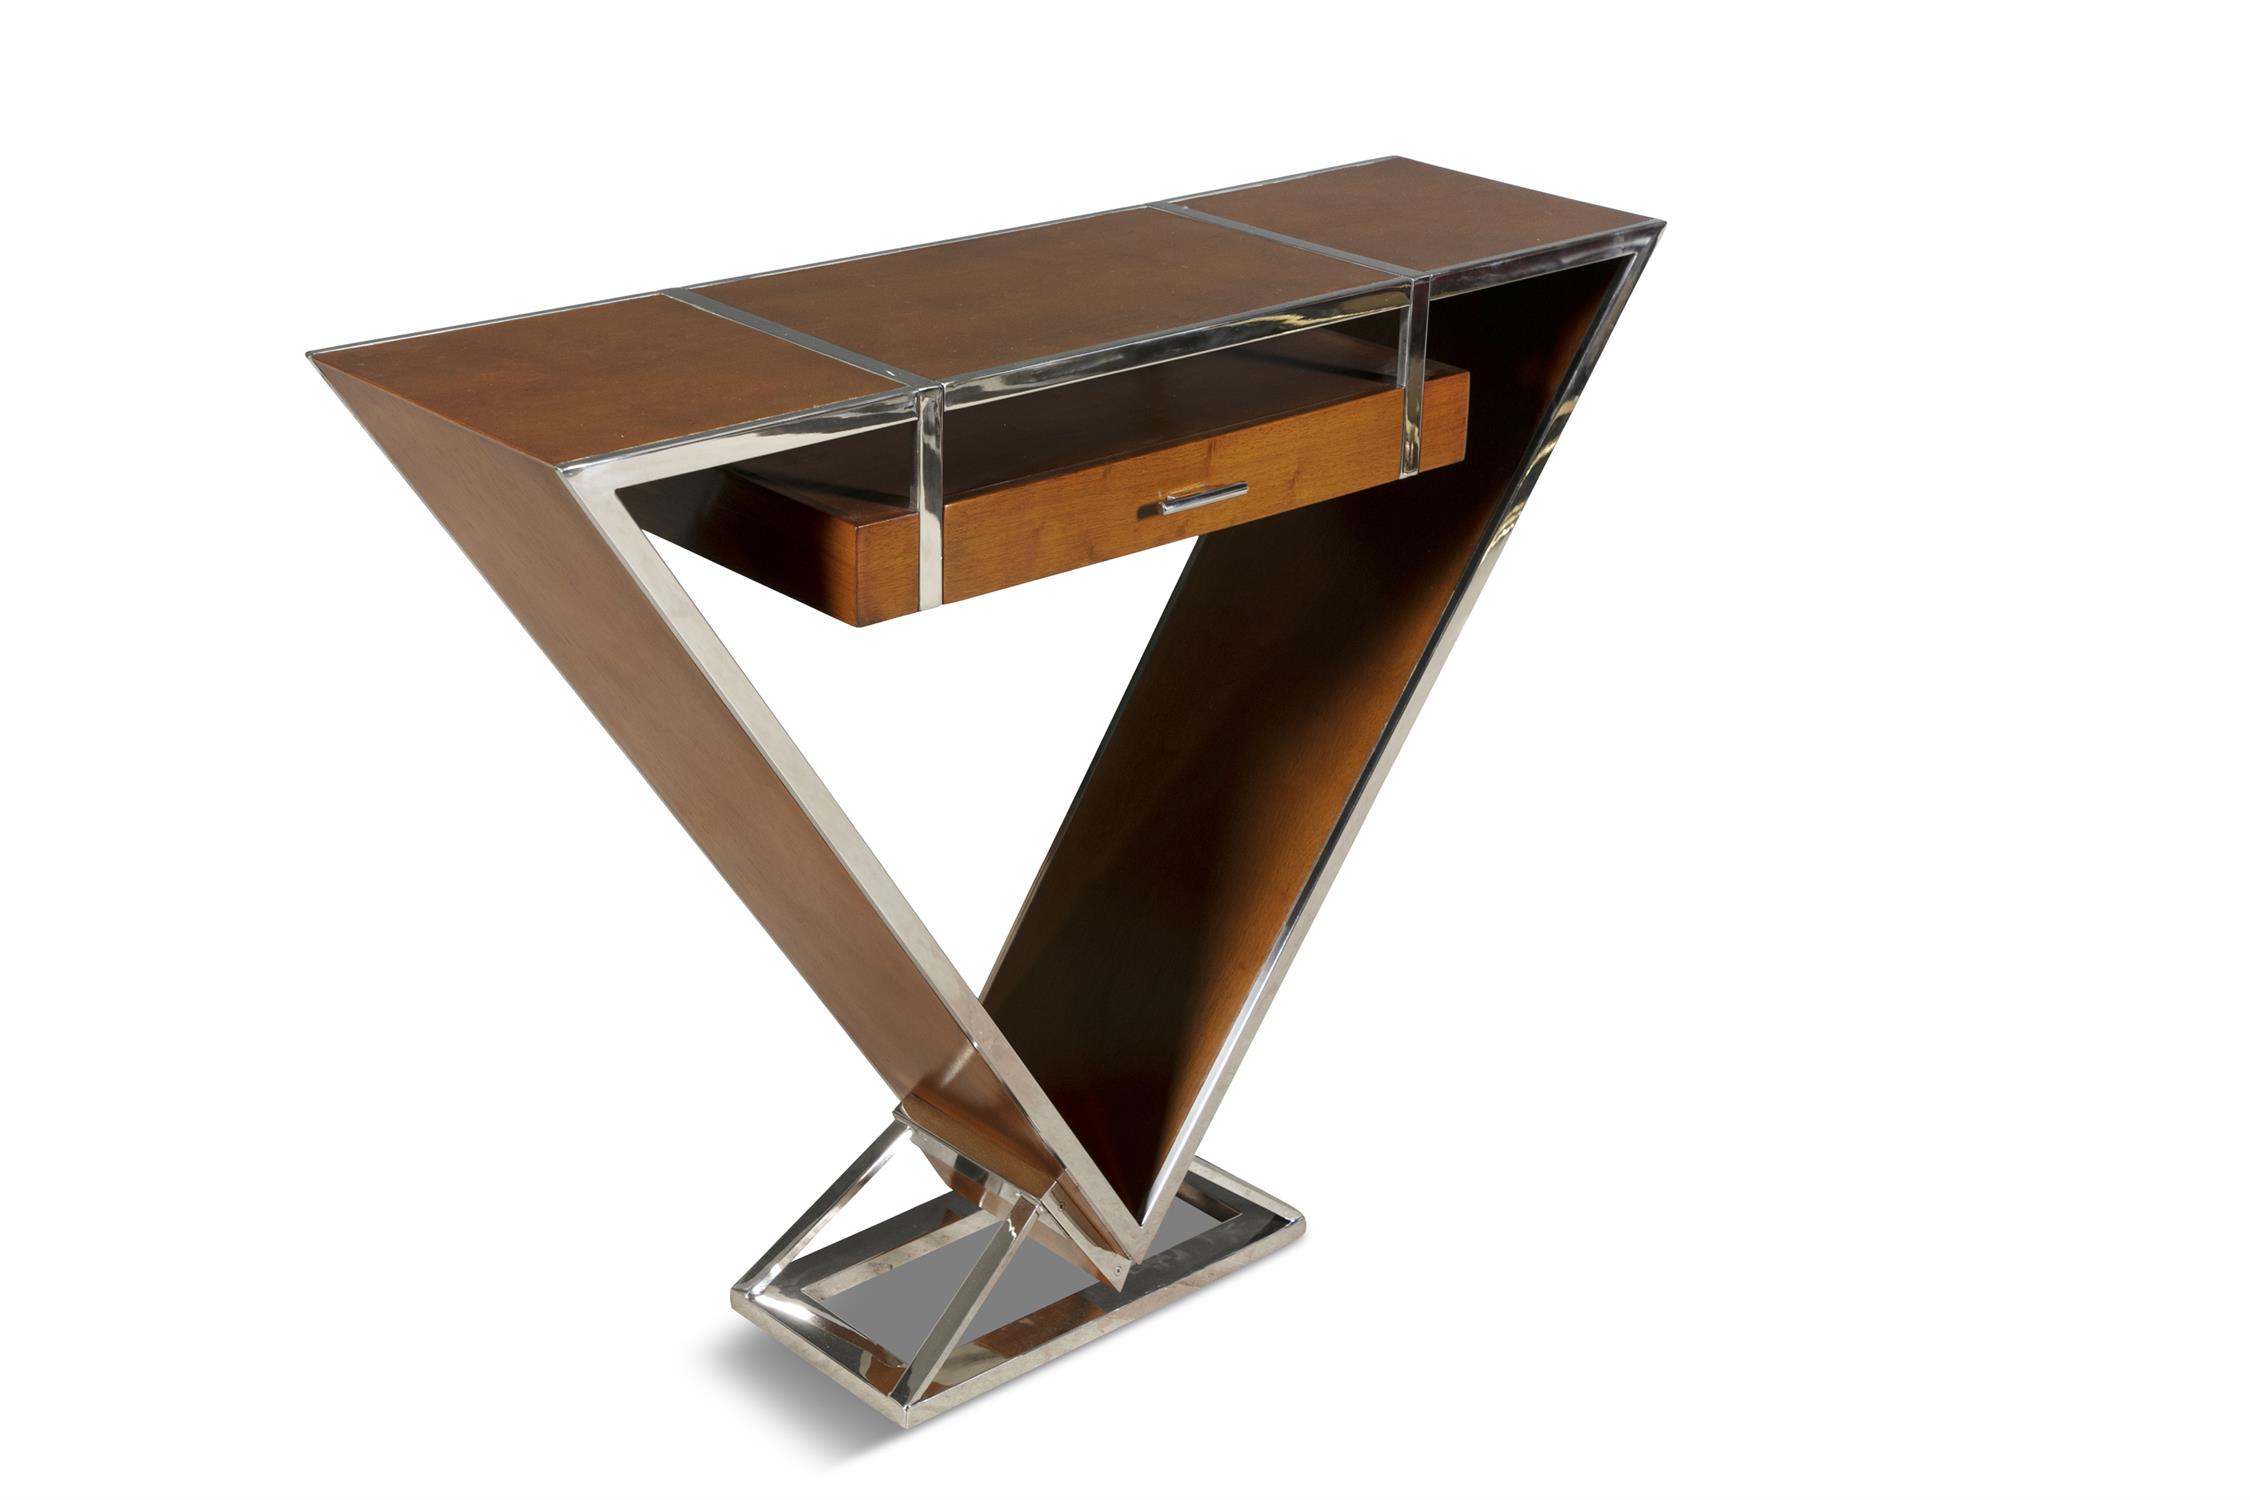 CONSOLE A triangular shaped console with a single drawer. Chrome and teak. France. - Image 4 of 7